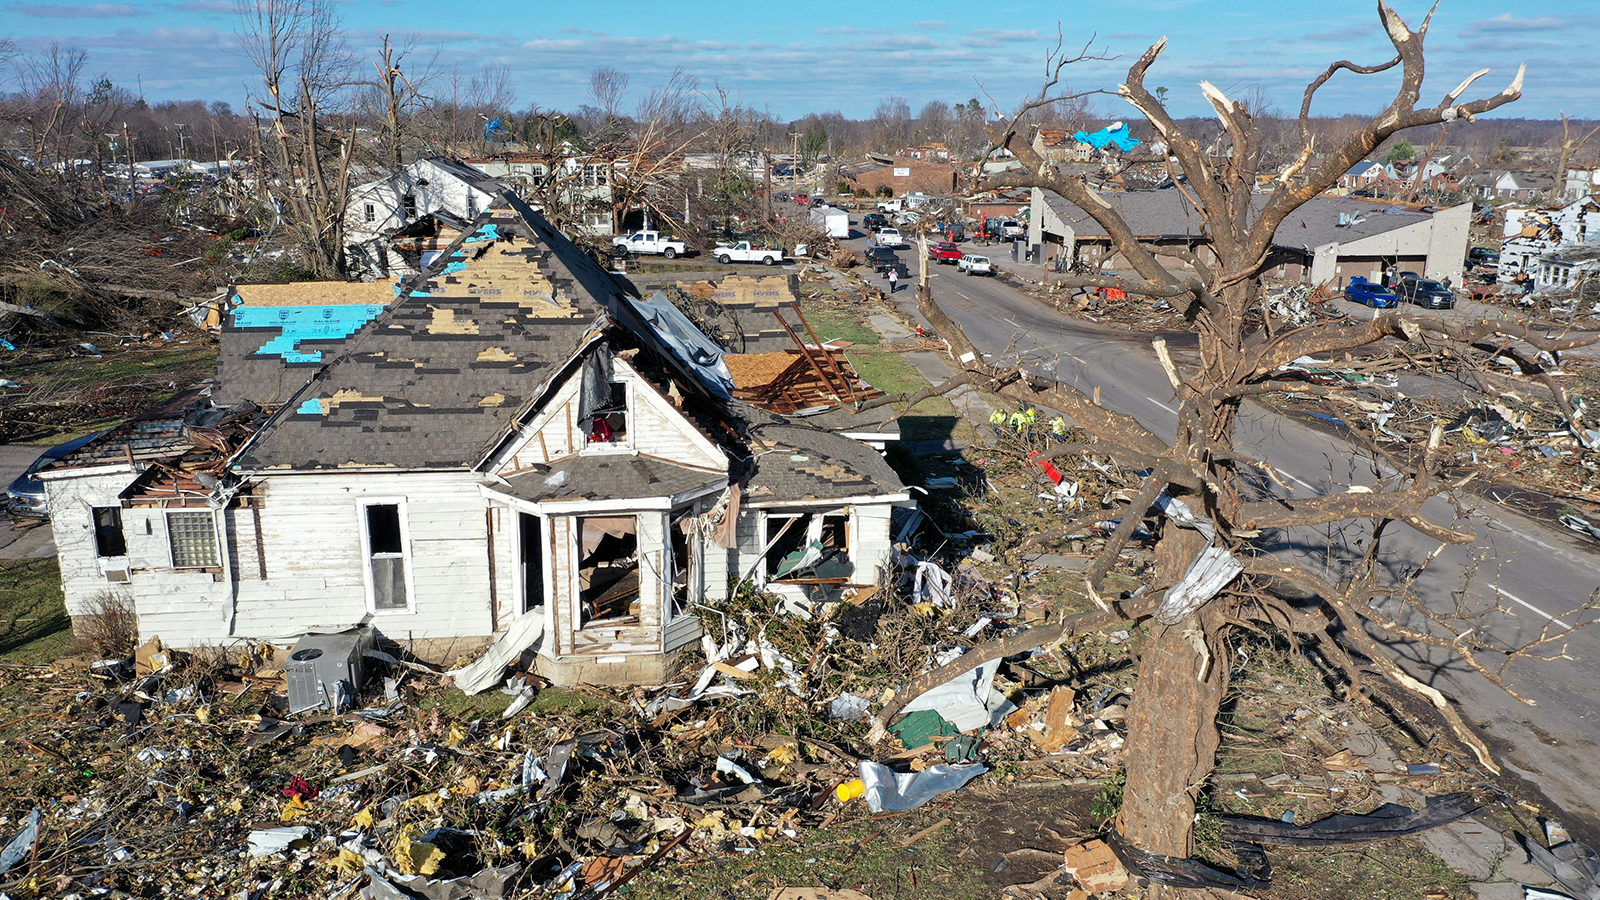 MAYFIELD, KENTUCKY - DECEMBER 11: In this aerial view, homes are badly destroyed after a tornado ri...